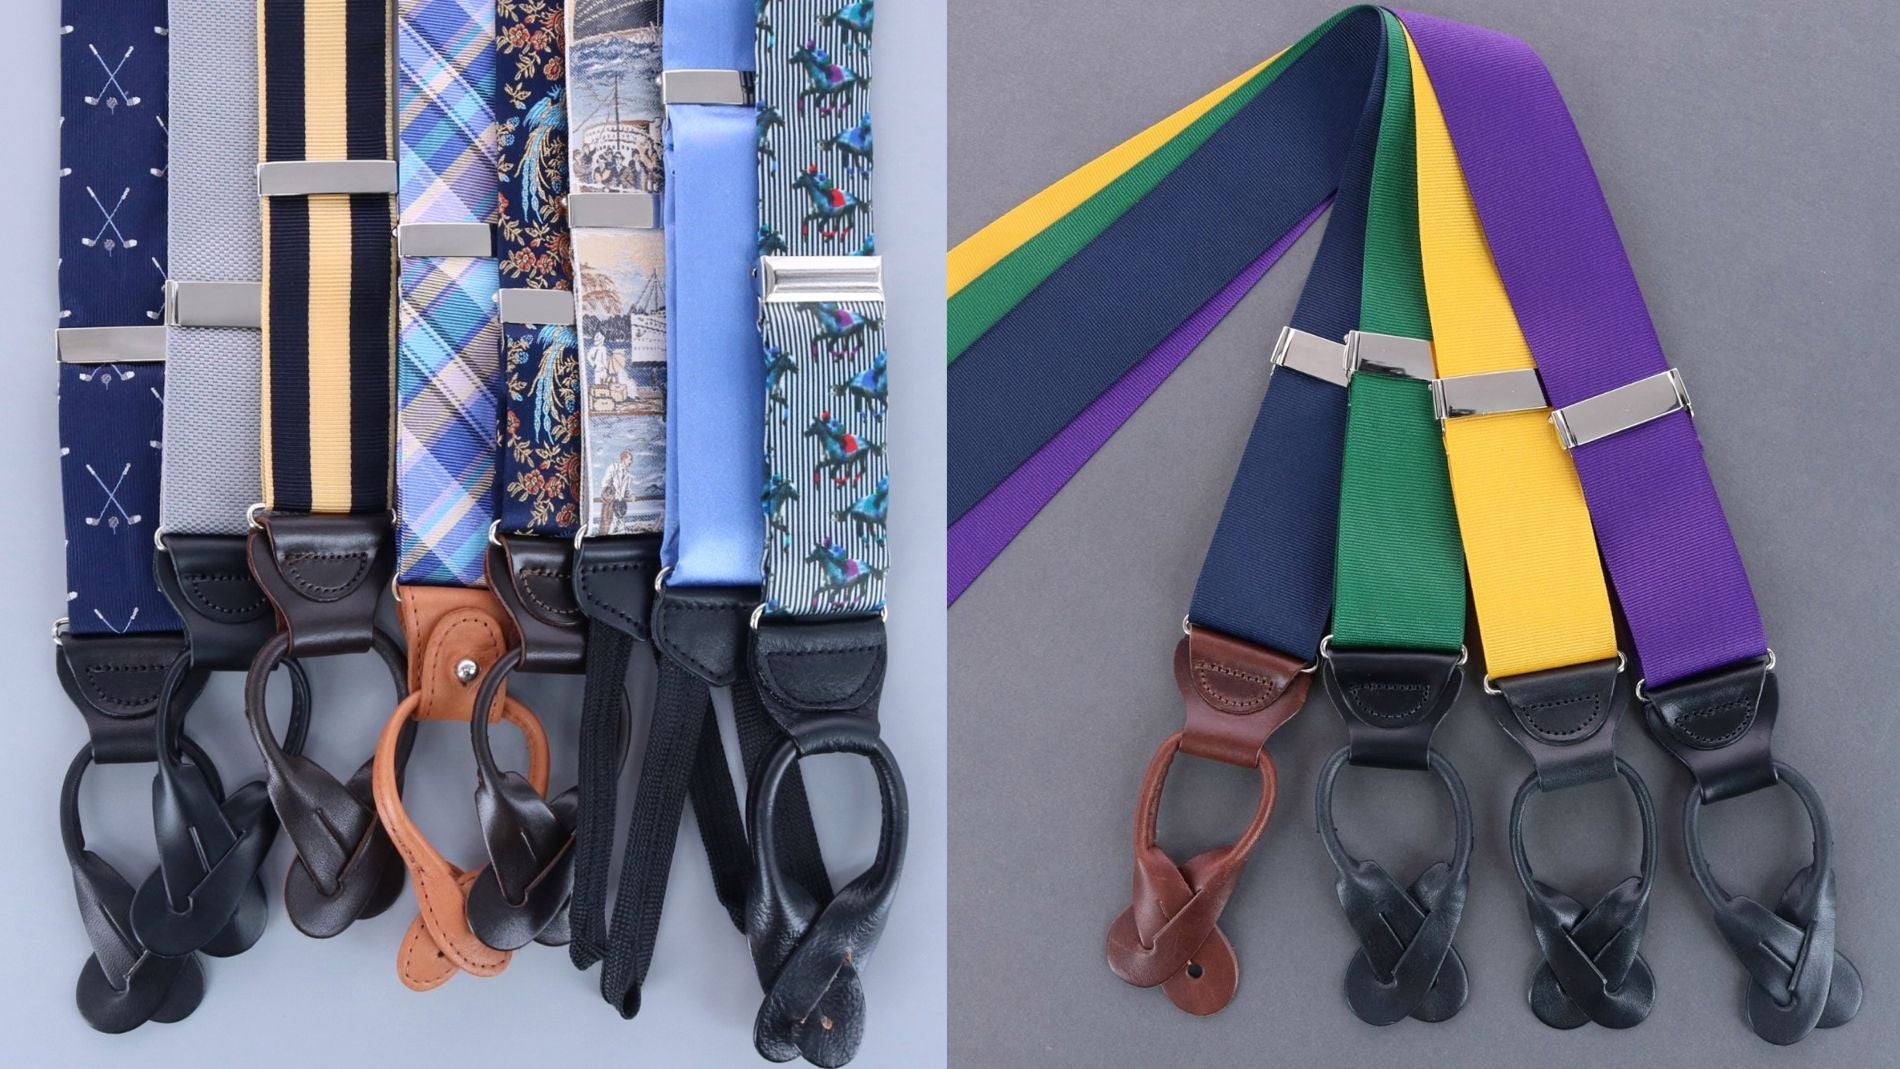 Suspenders and Braces at J. Men's Clothing